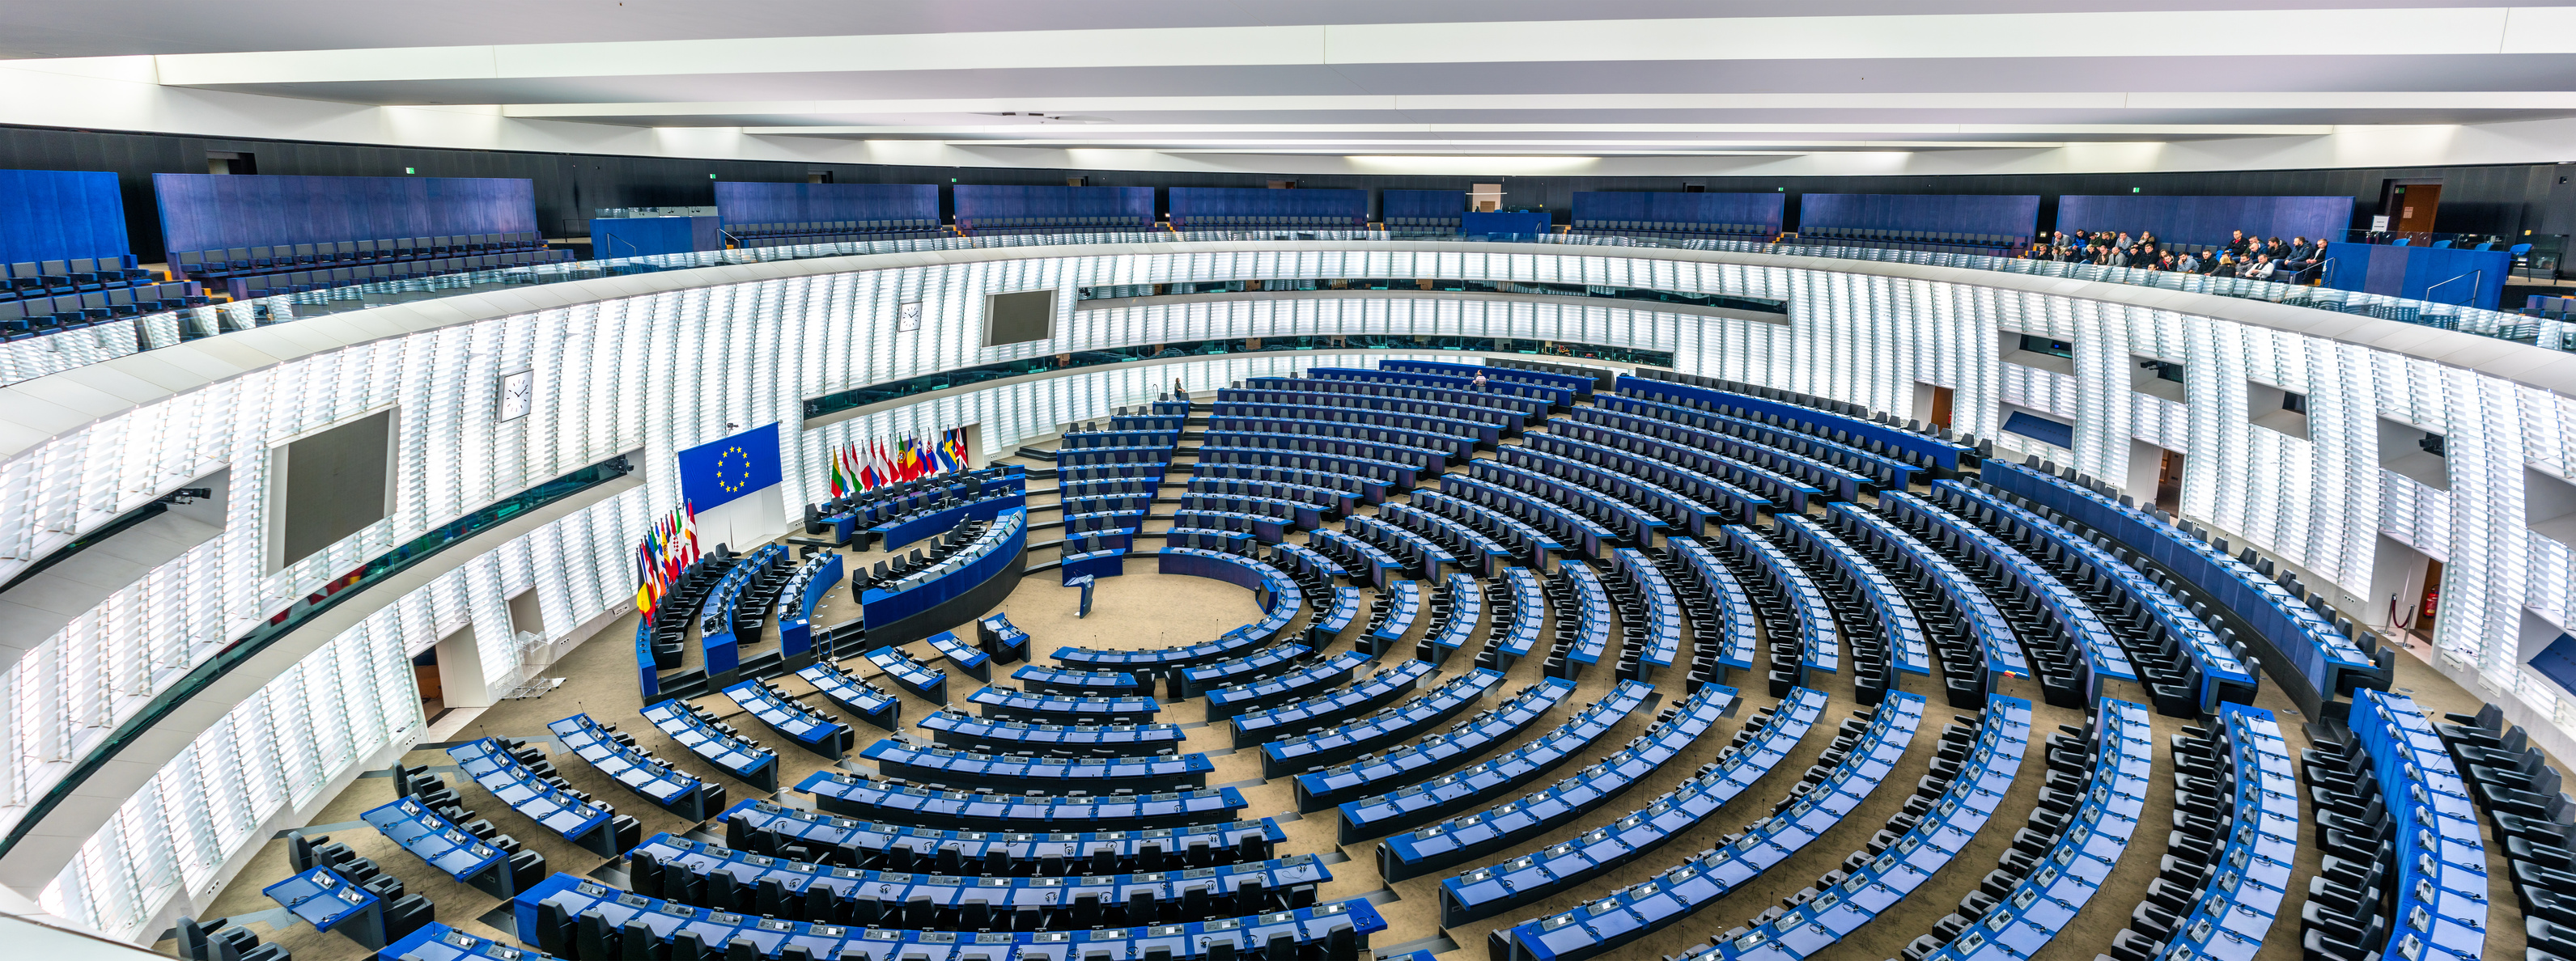 Plenary Hall of the European Parliament in Strasbourg